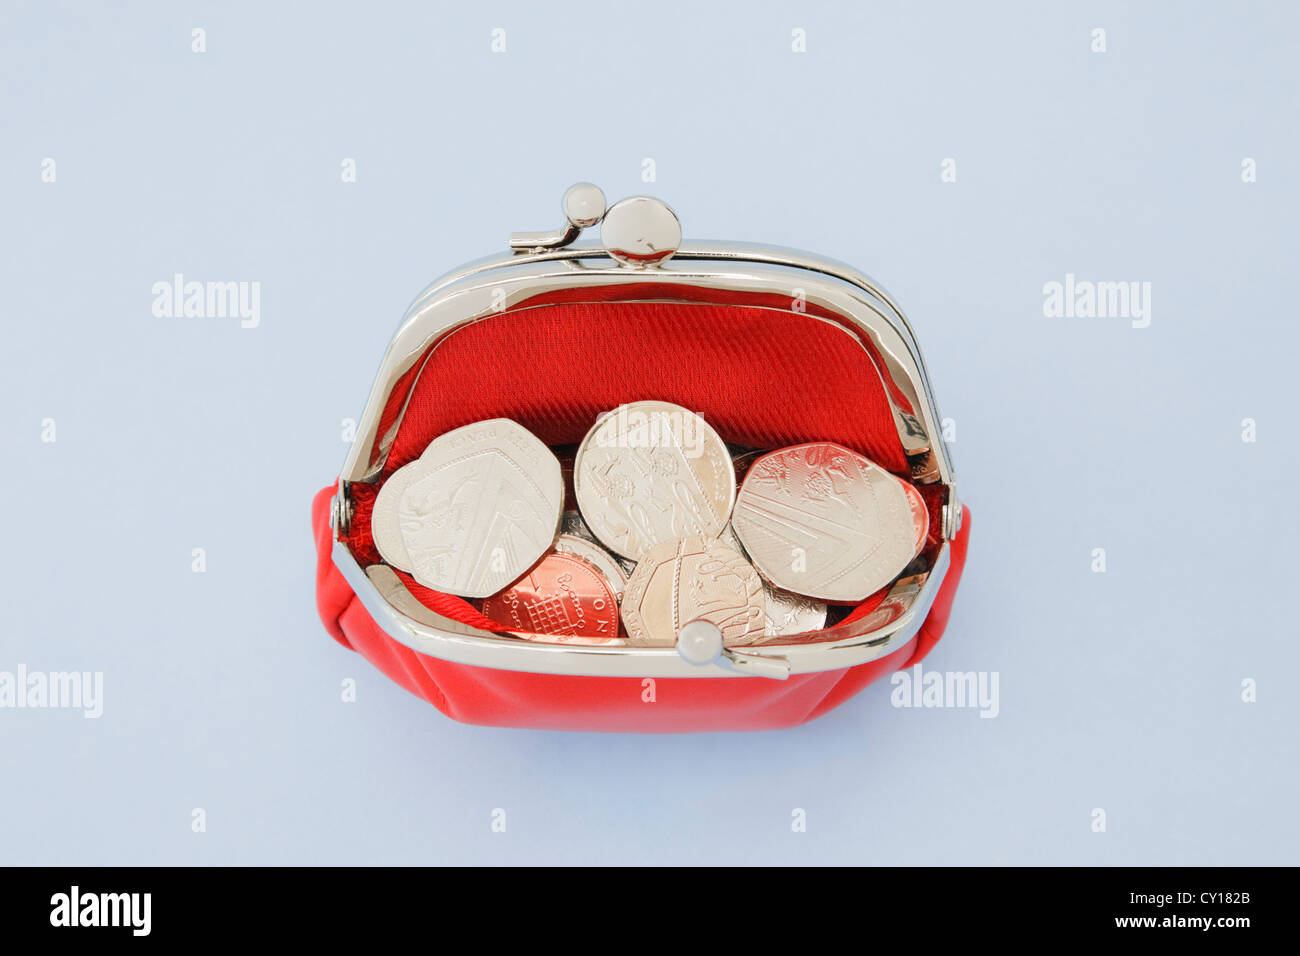 Red money coin purse open full of coins on a plain blue background from above. England, UK, Britain. Stock Photo